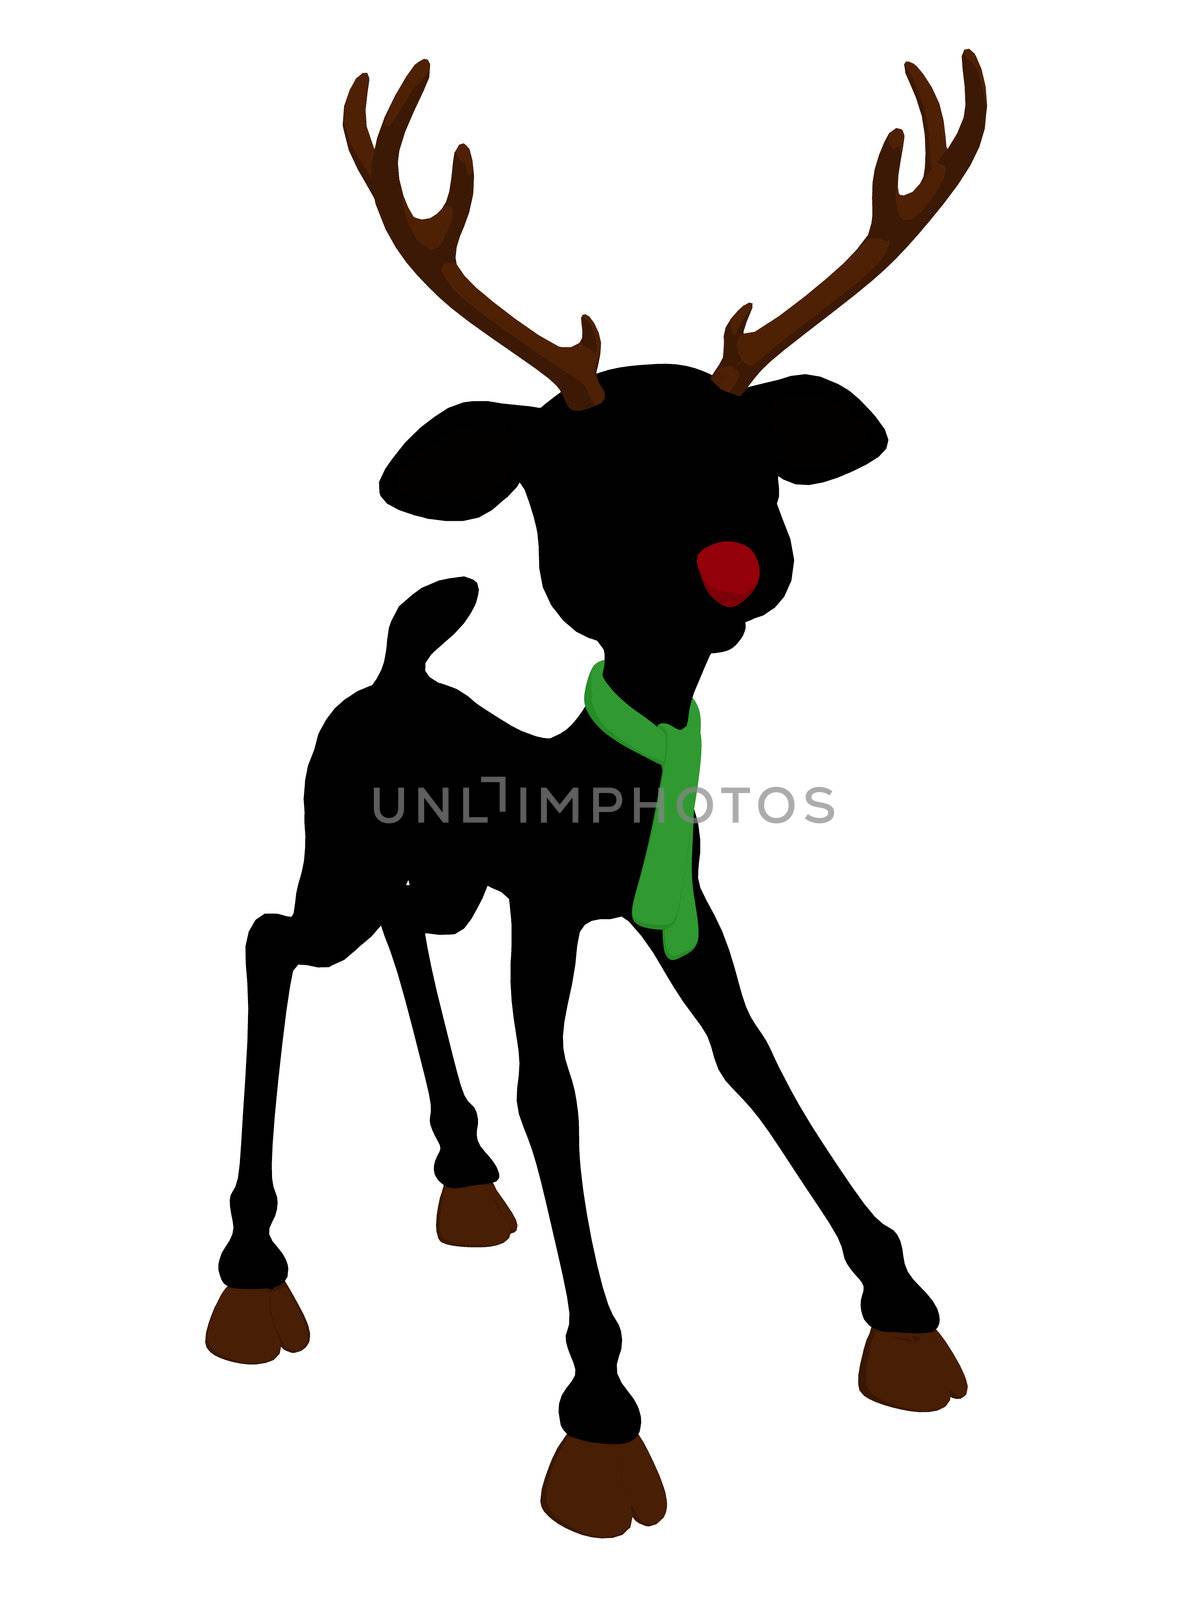 Rudolph The Red Nosed Reindeer Silhouette Illustration by kathygold